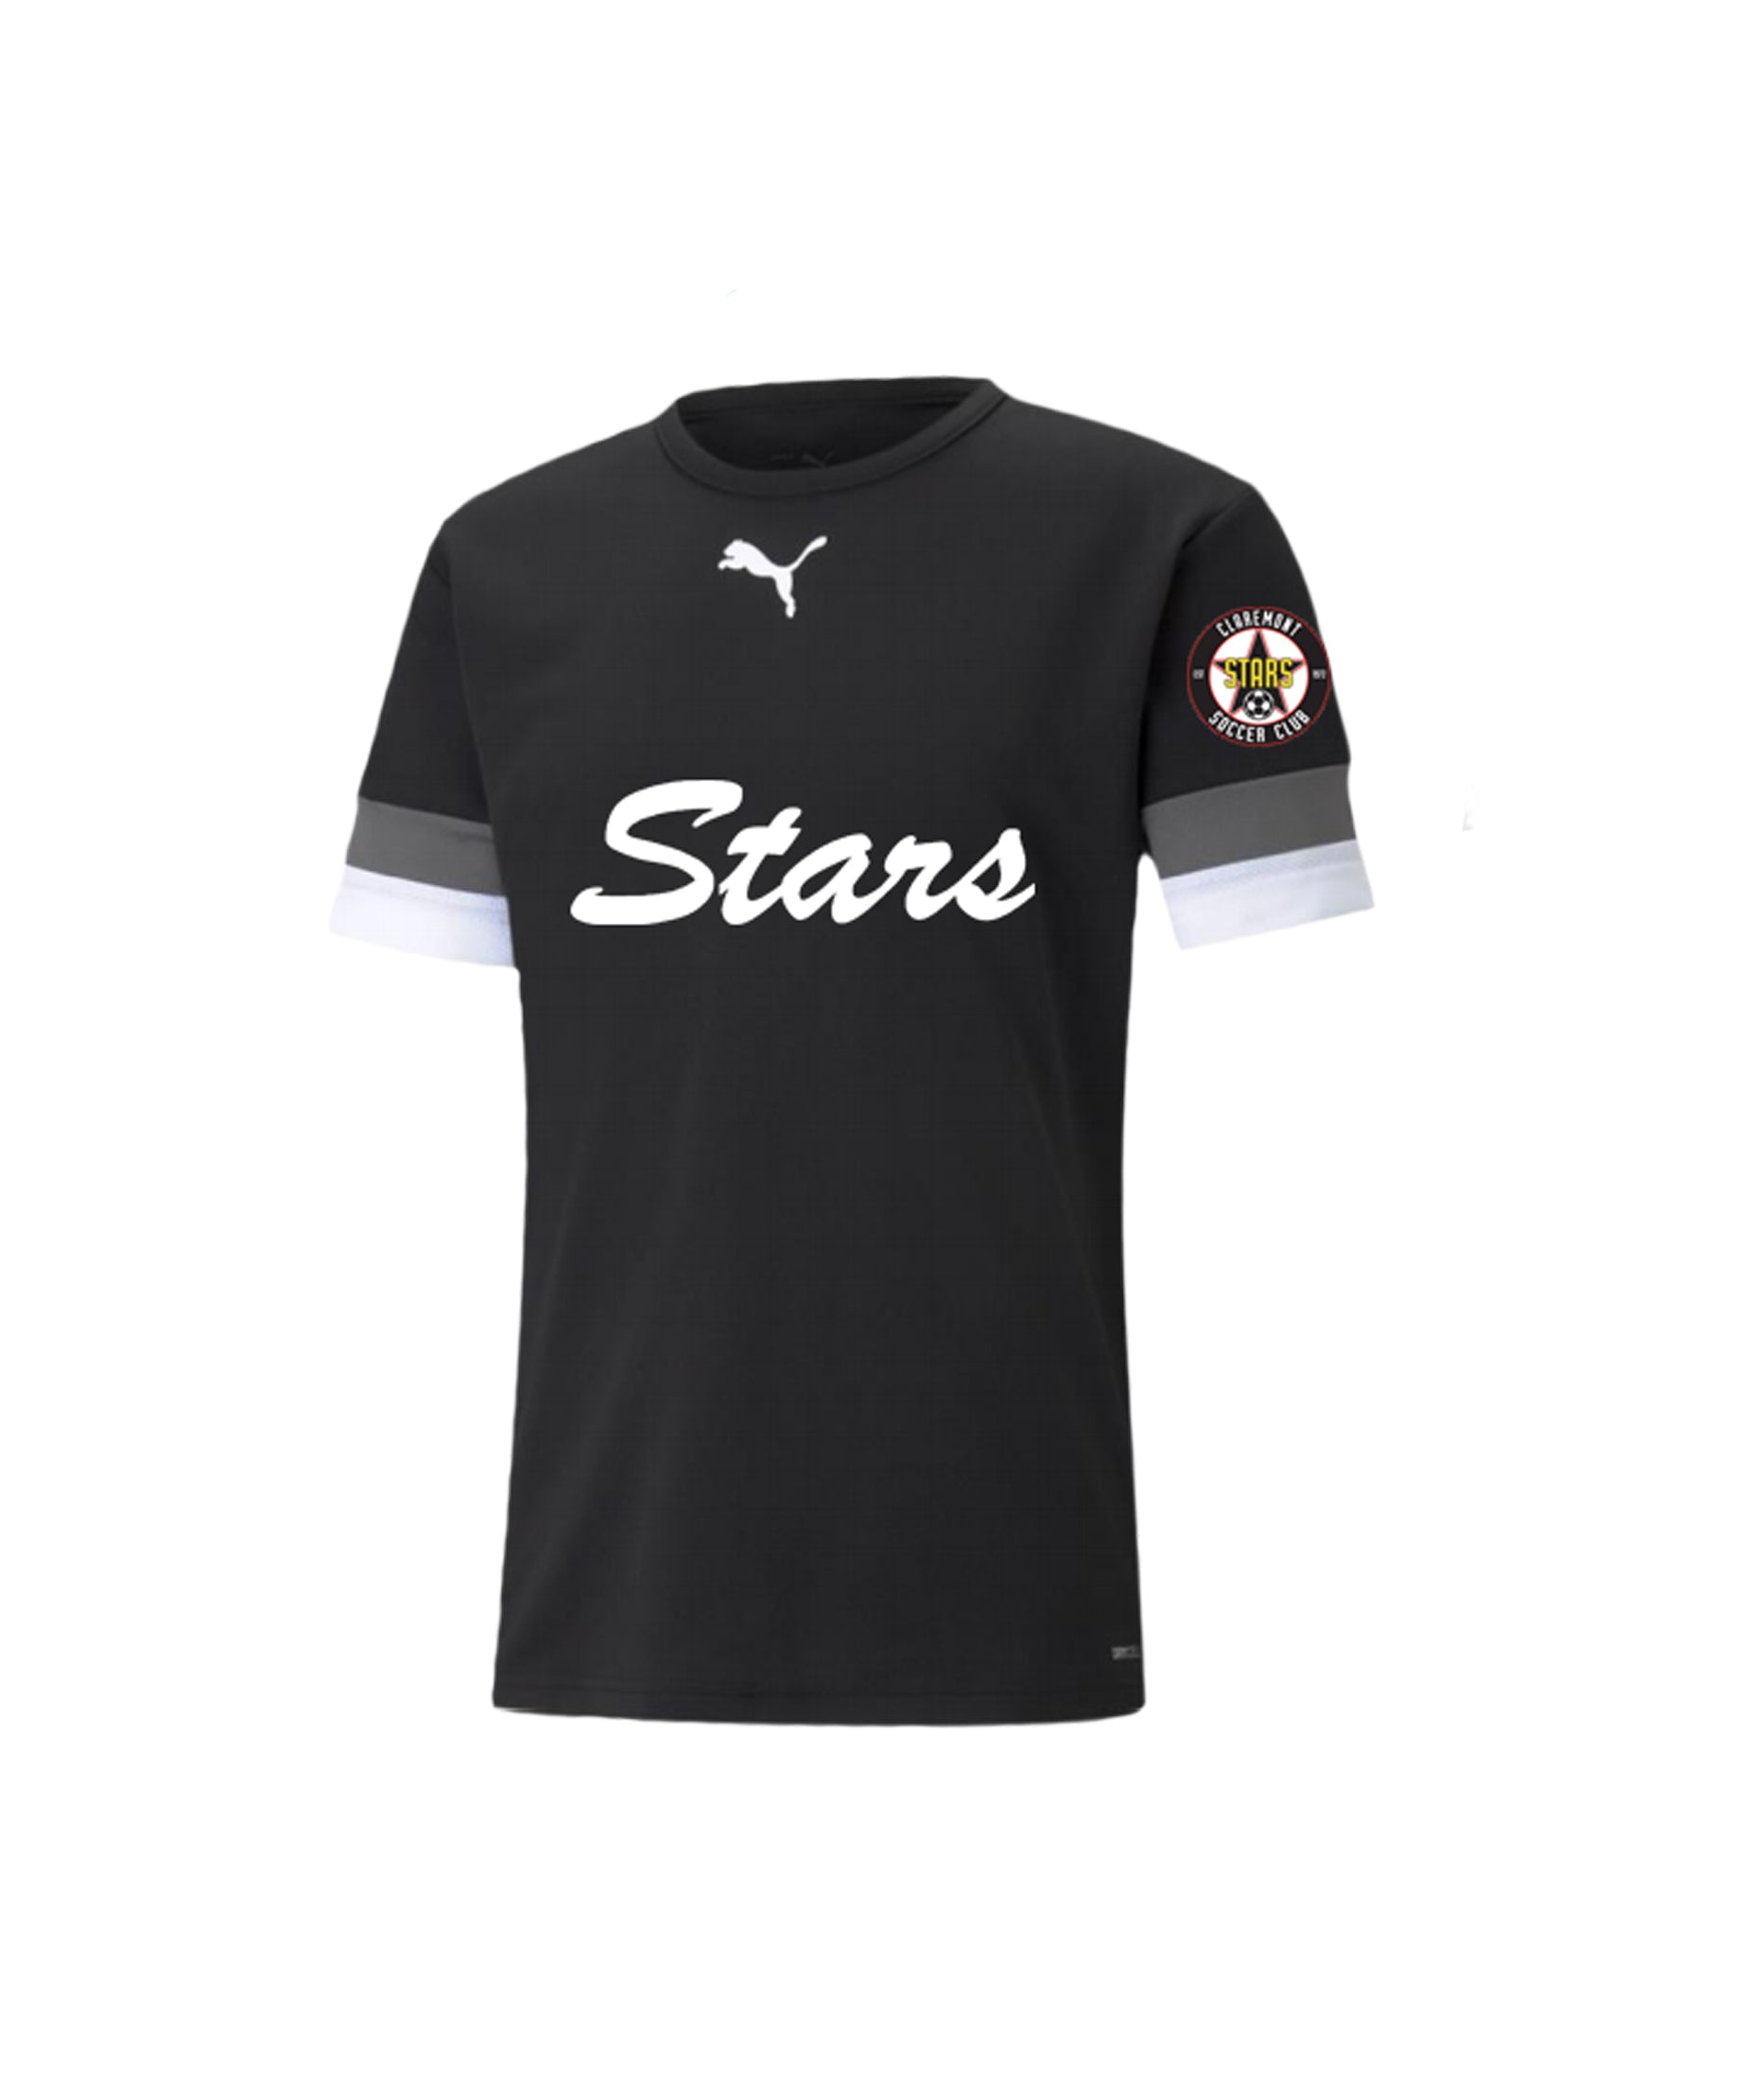 CLAREMONT STARS YOUTH PRACTICE JERSEY - PUMA TEAM RISE